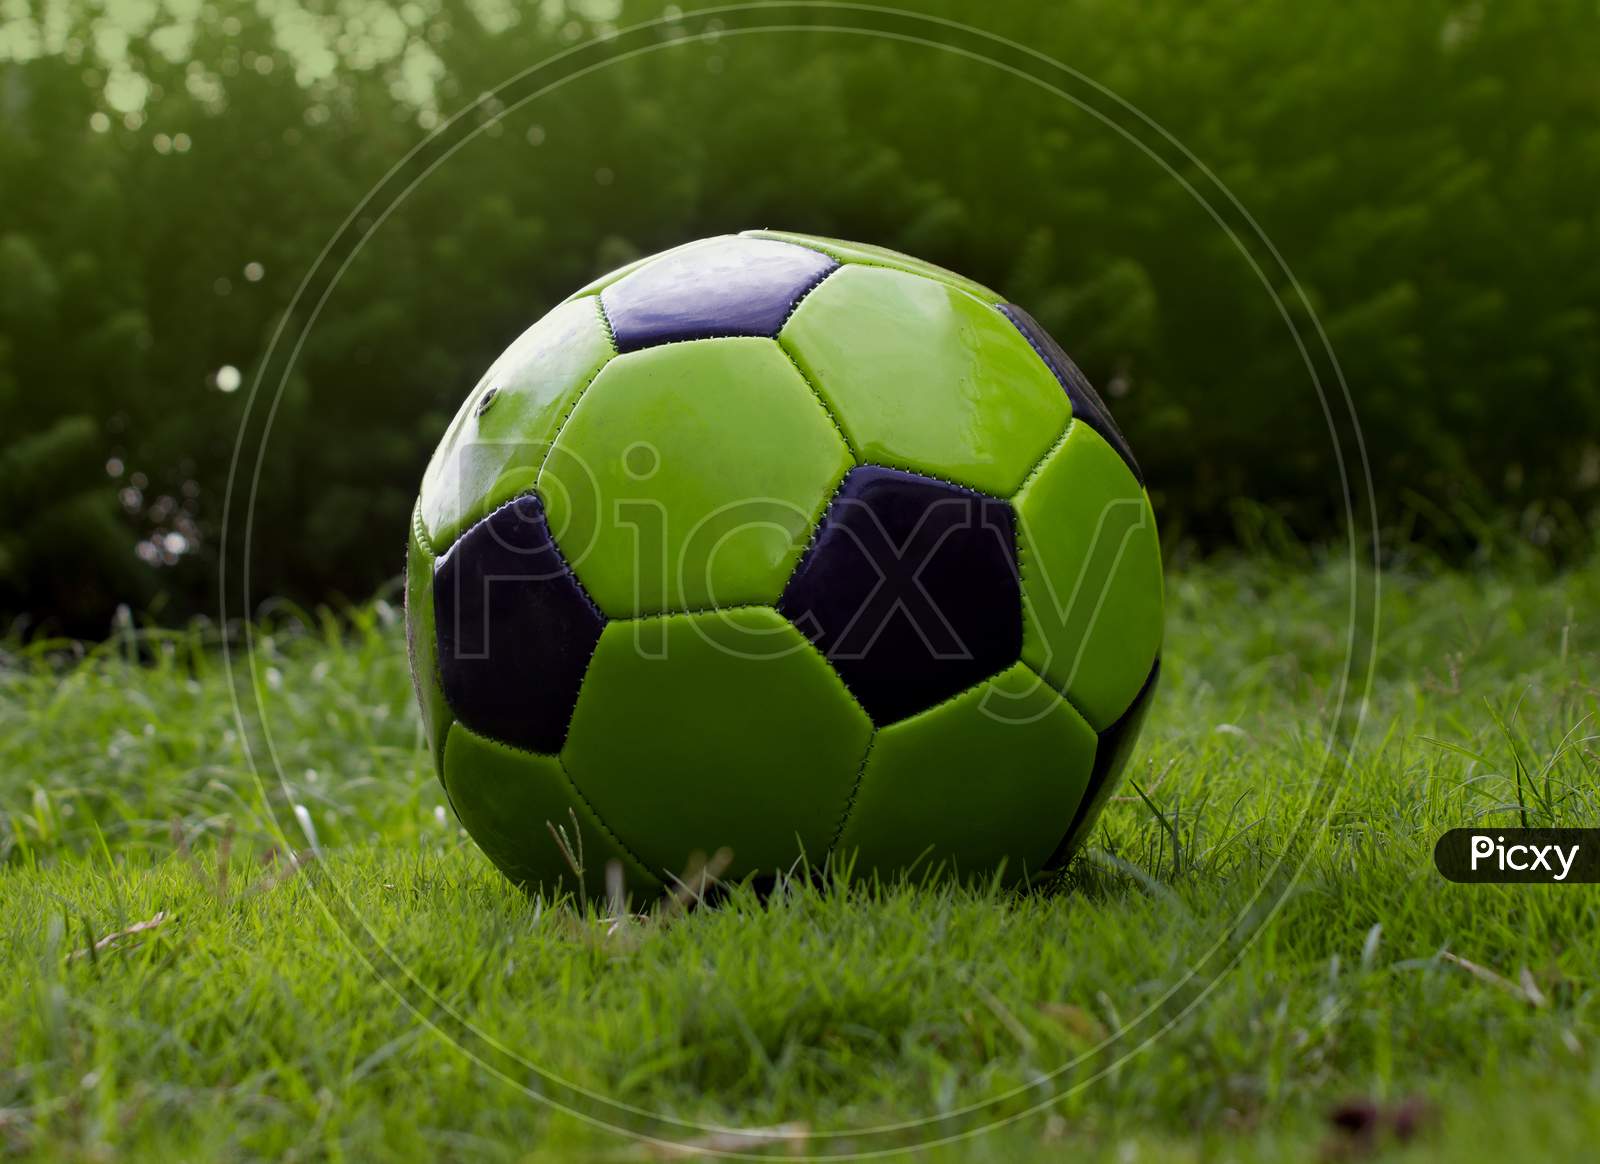 Selective focus on a Football in a Ground